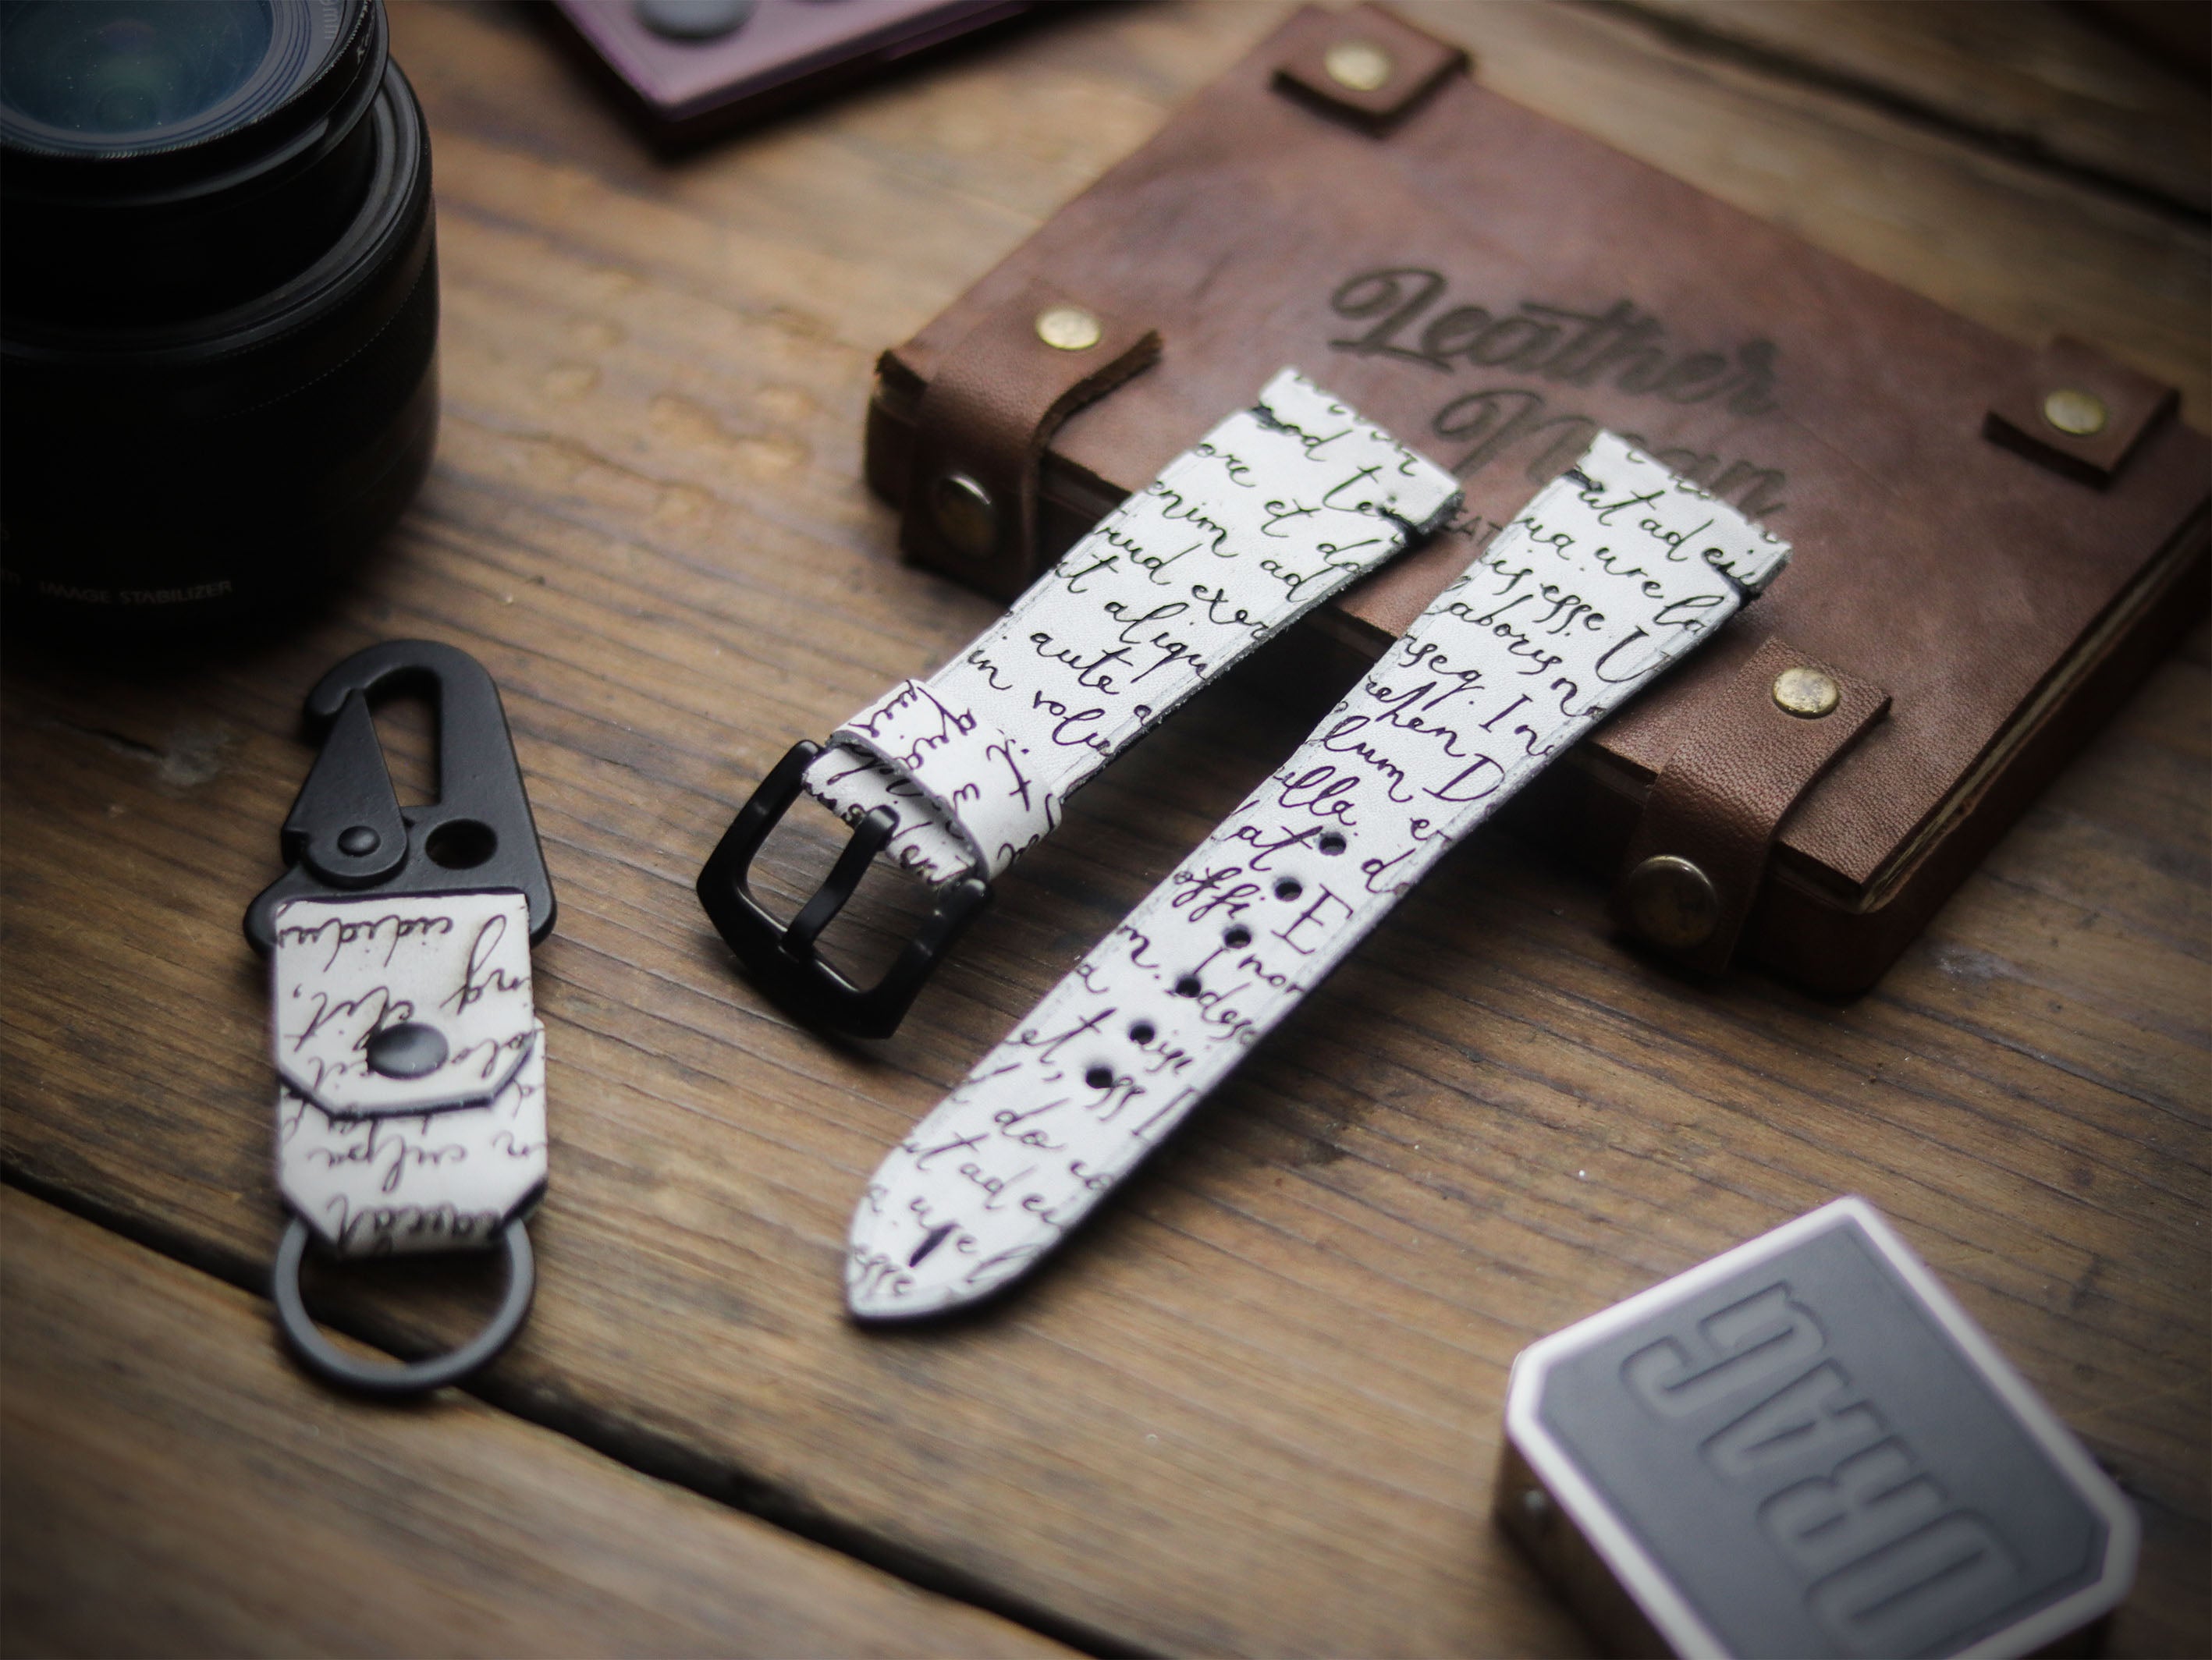 E3 ENGRAVED HAND-CRAFTED QUICK PINS STRAPS - SNOW WHITE